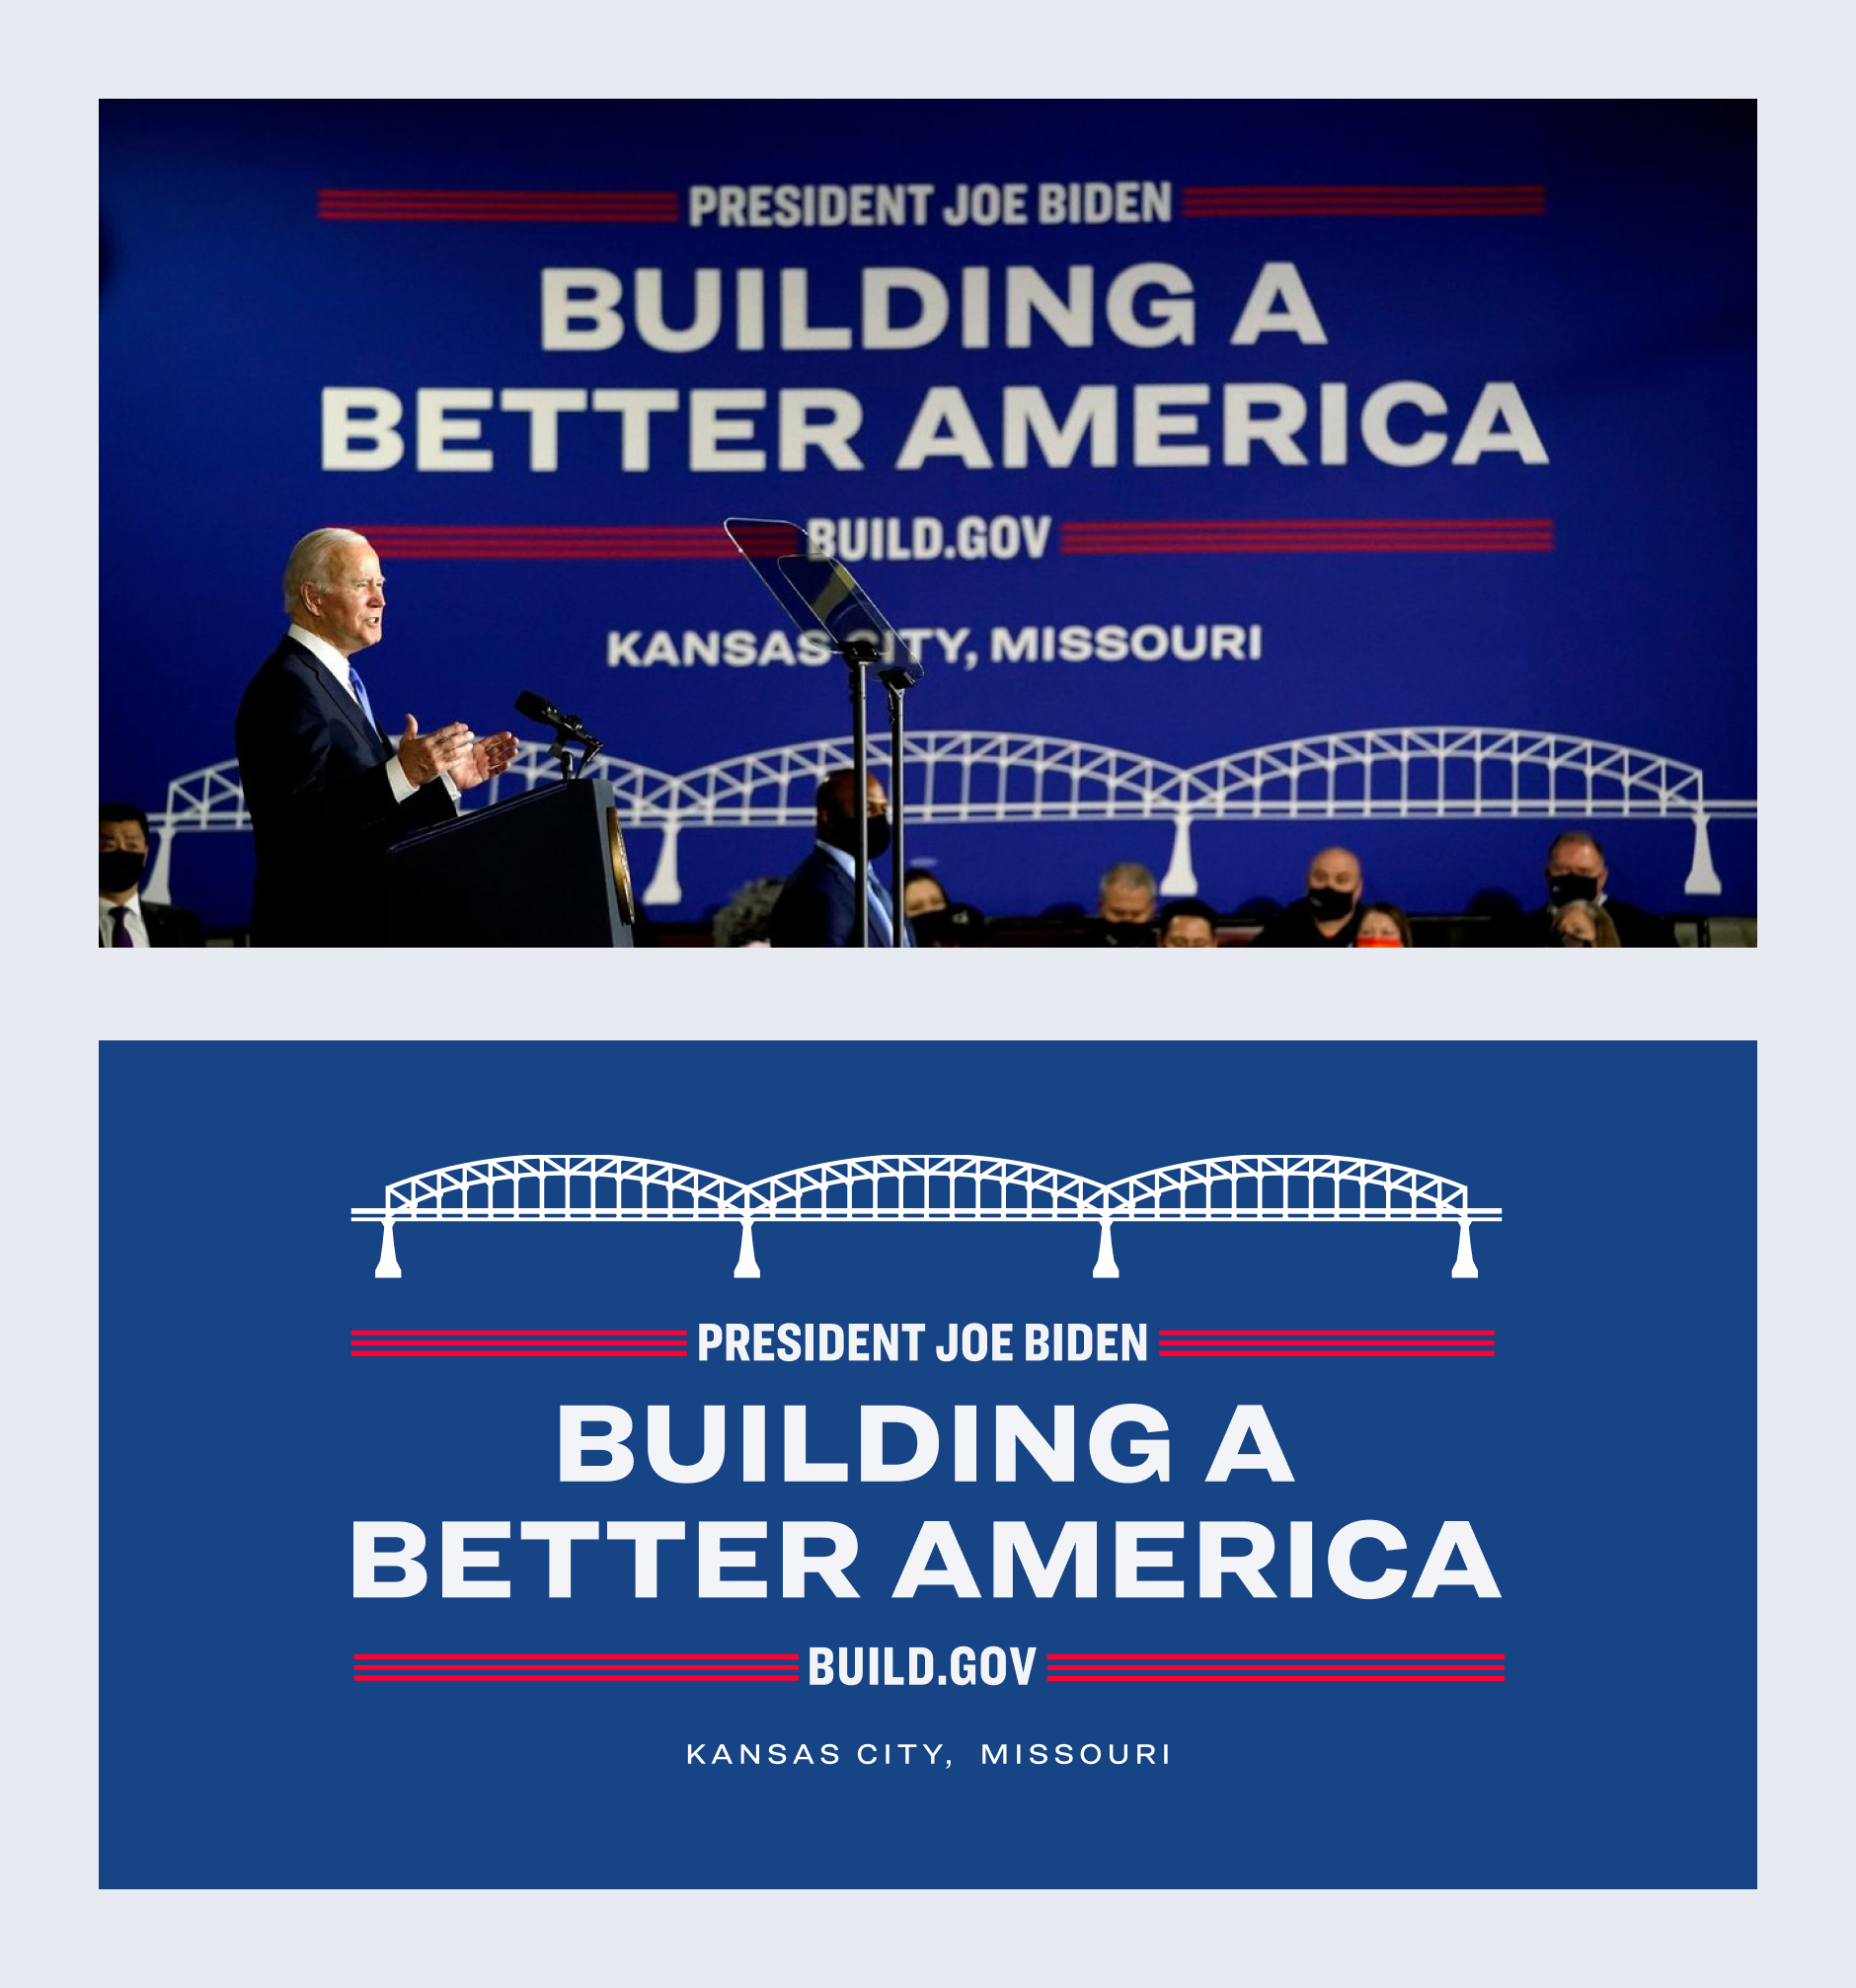 Building a Better America logo on blue shown on a wall behind President Biden as he speaks at a podium